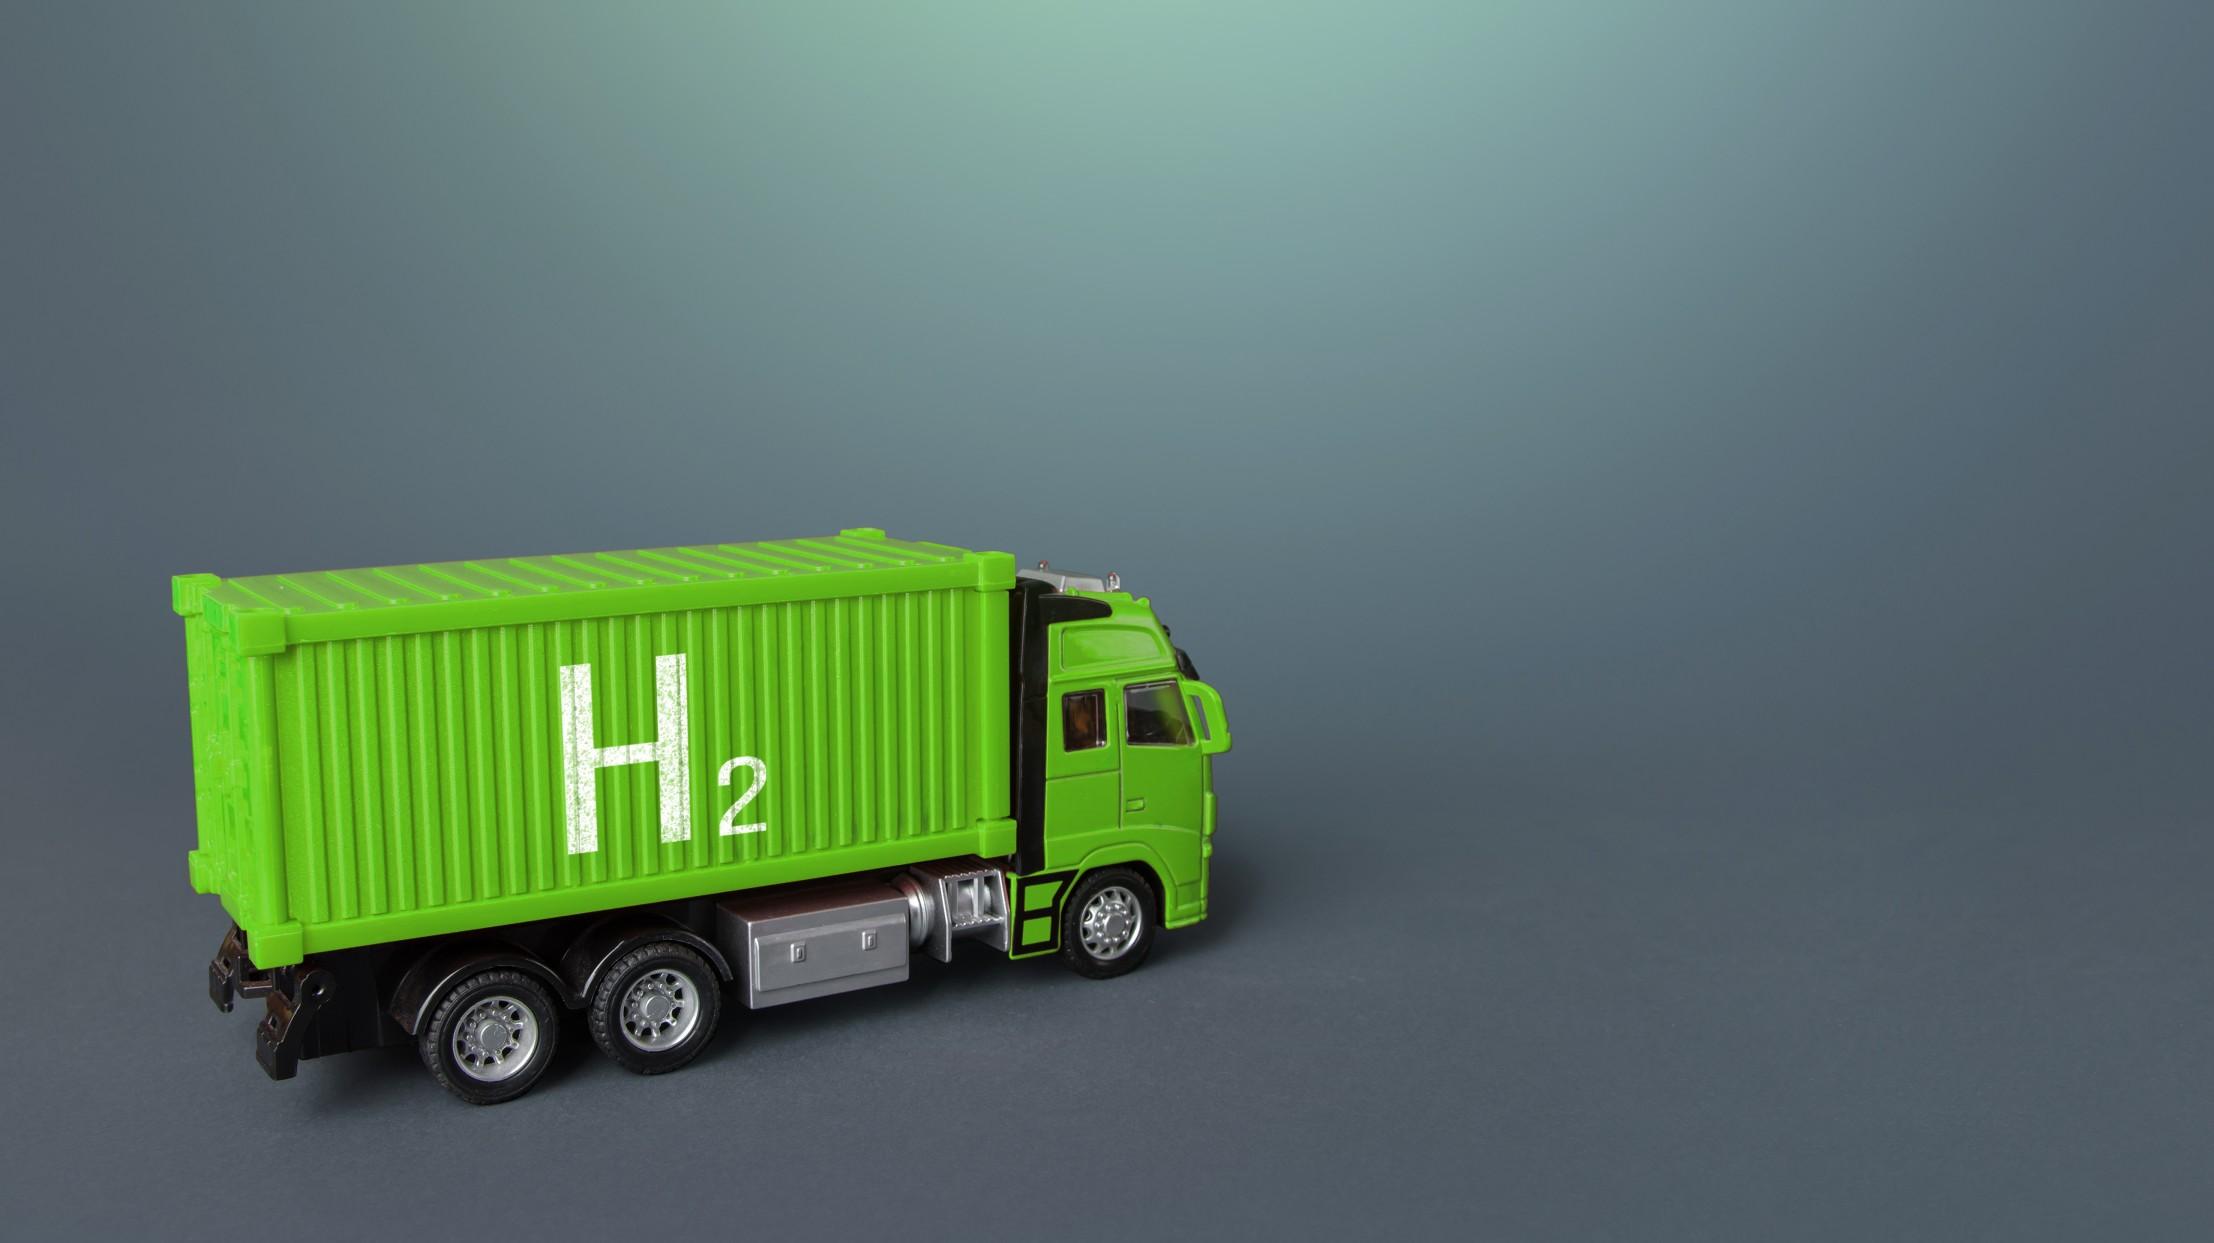 California has made a bigger commitment to hydrogen fuel than any other state.